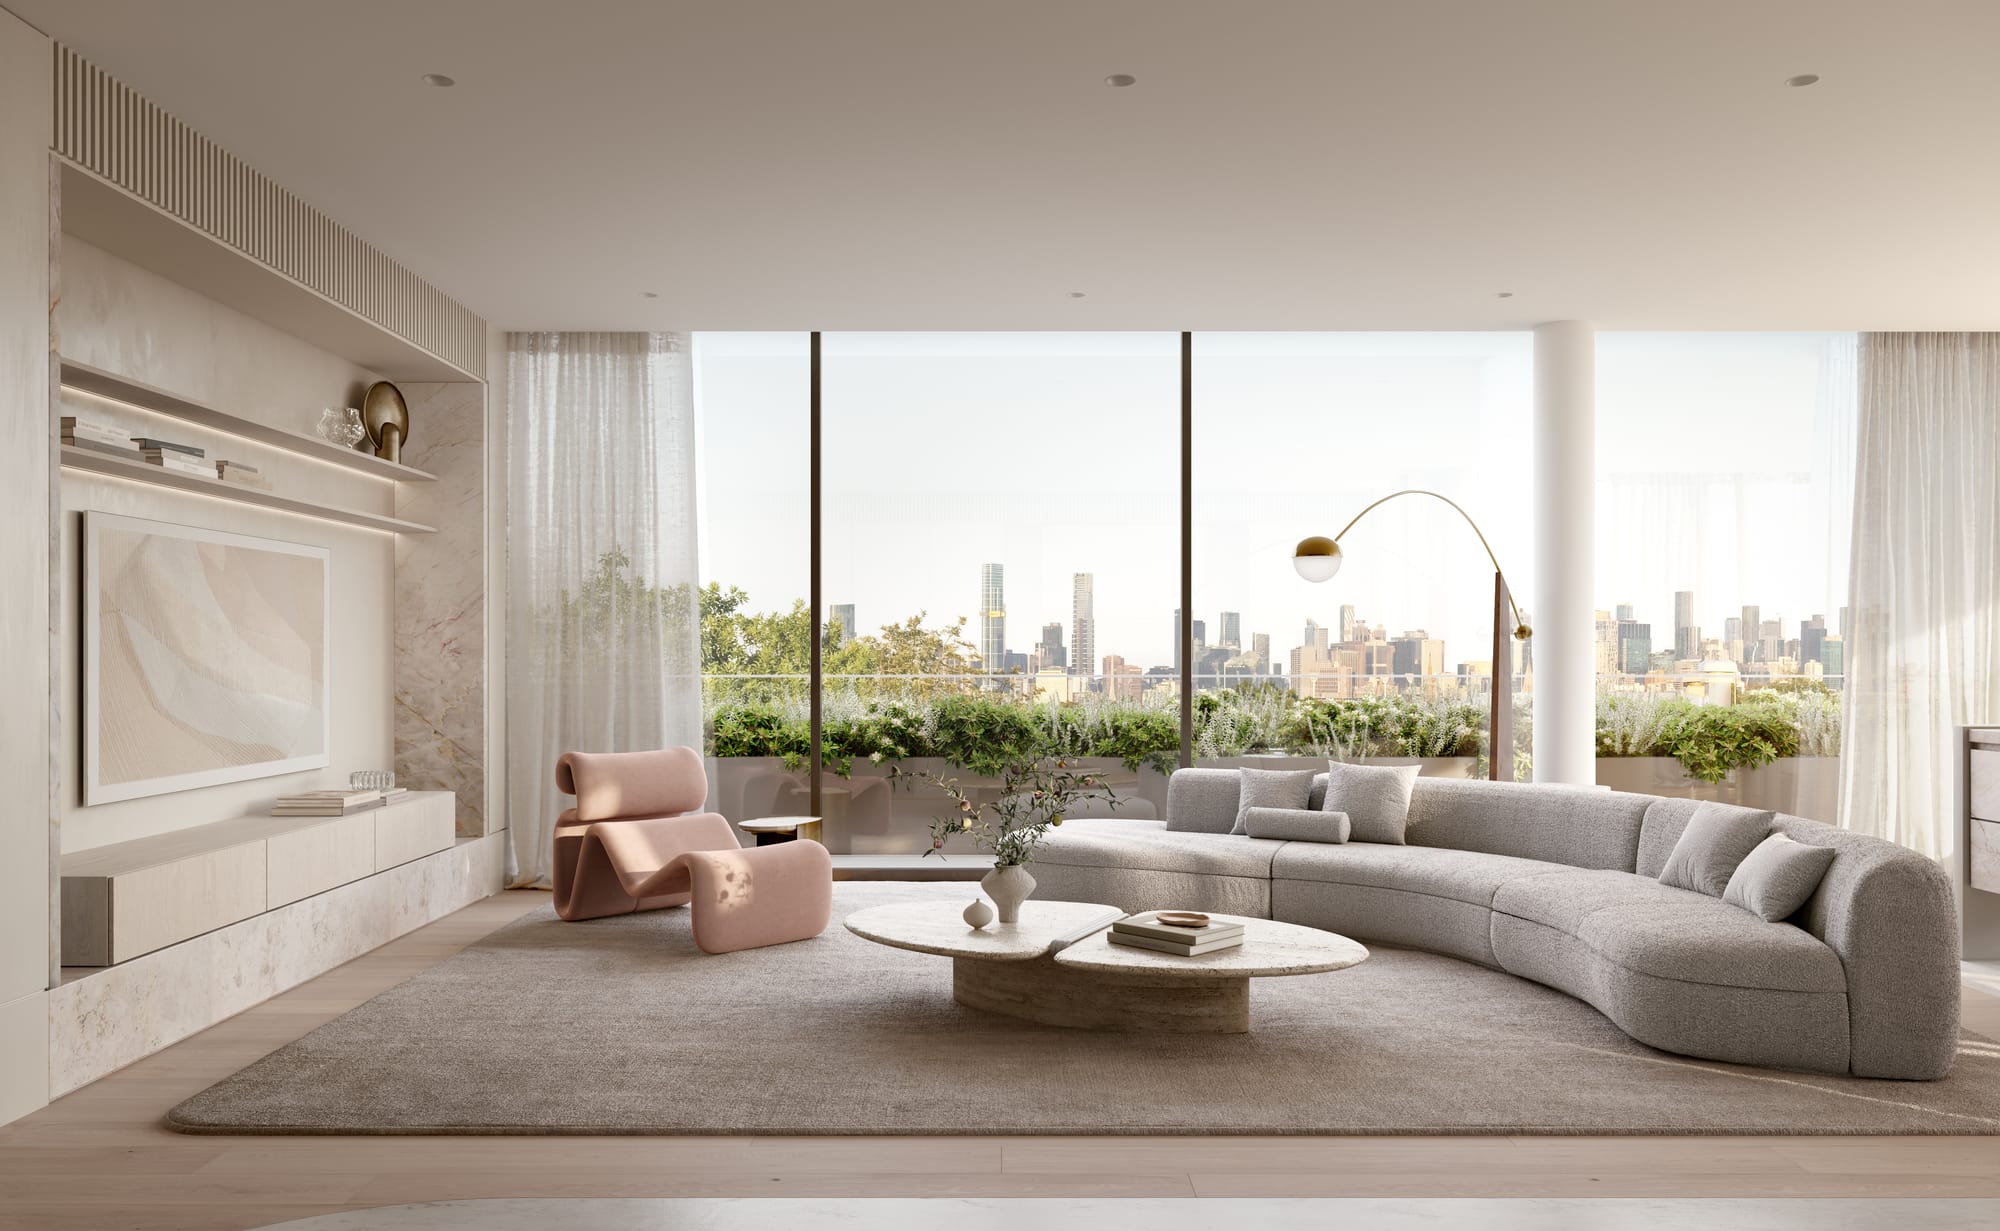 Sculpt Hawthorn by Mim Design, Parallel Workshop and Jack Merlo. Render copyright of Studio Piper. Large living space in penthouse with floor-to-ceiling windows overlooking city views. Timber floors, stone coffee table and grey curved couch. 